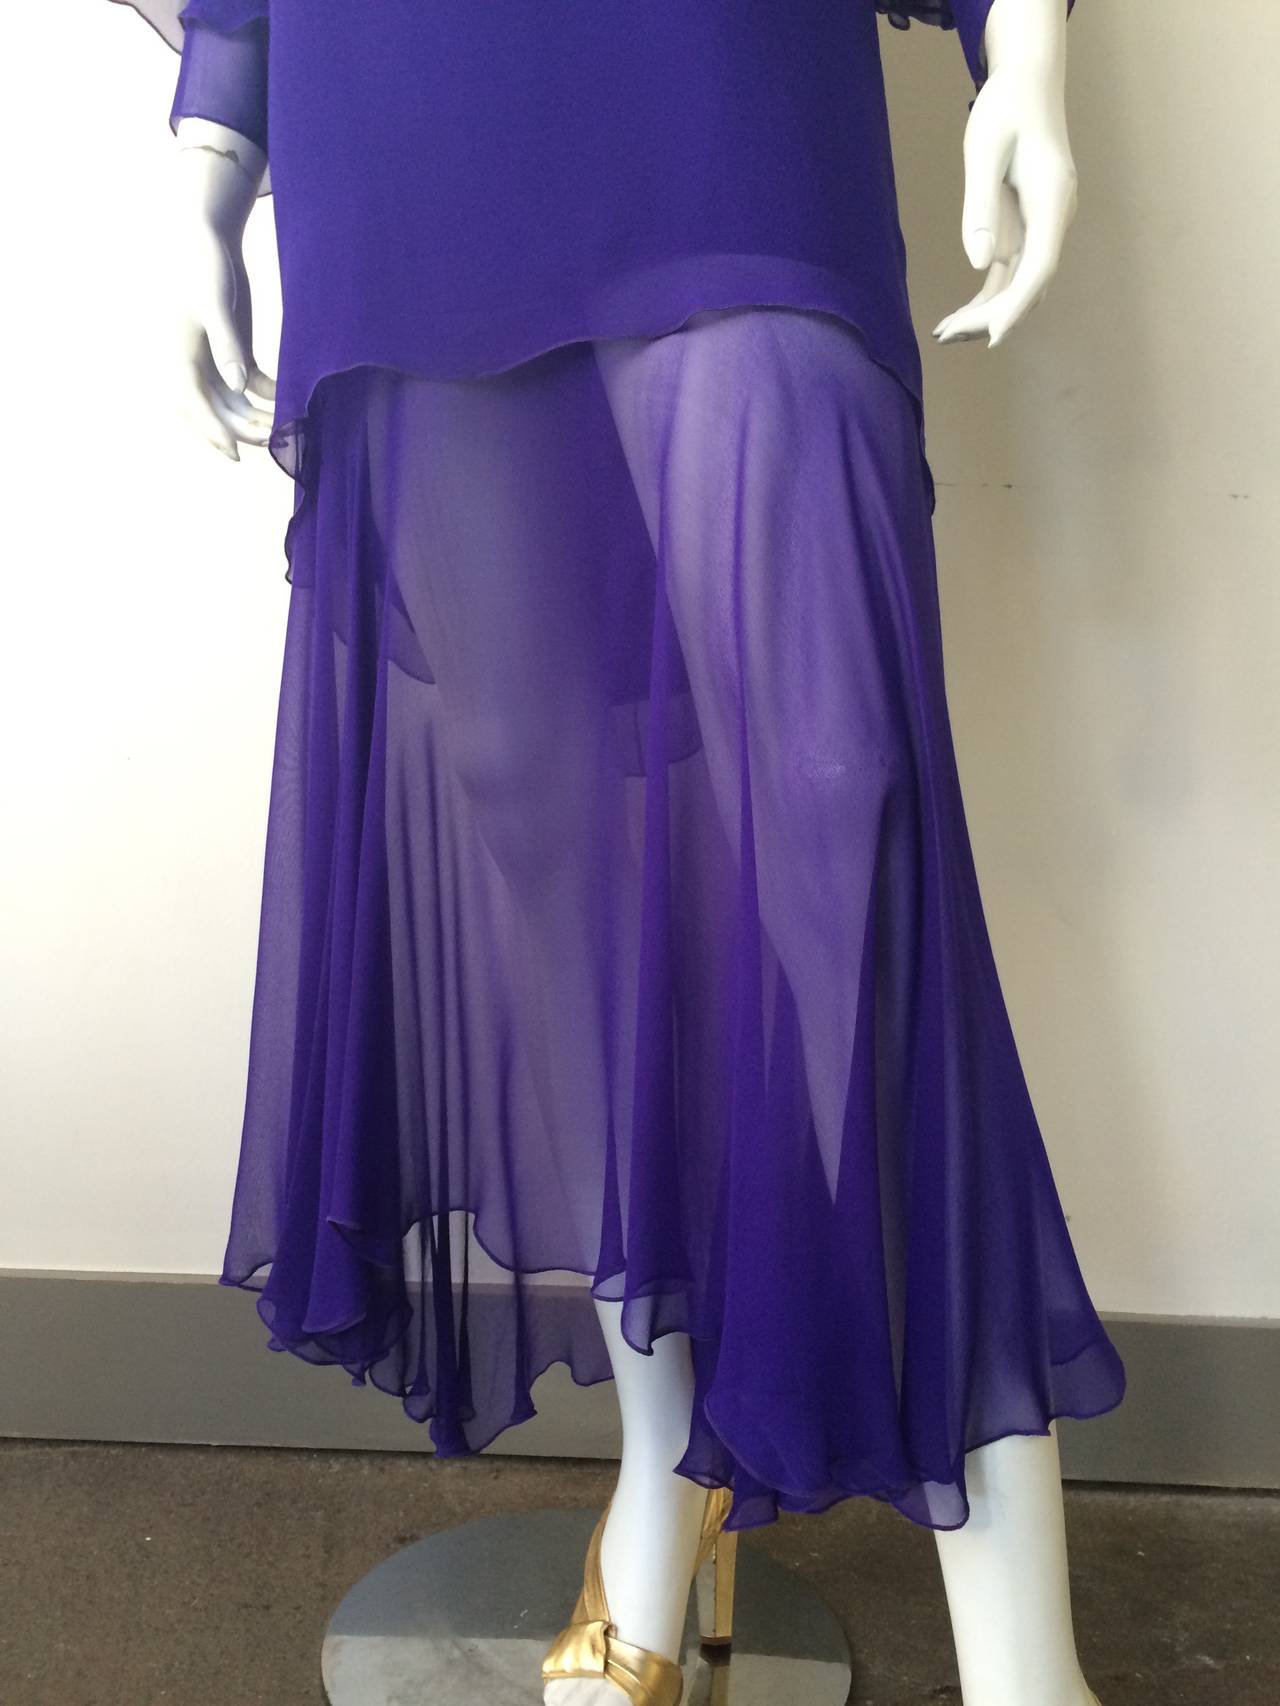 Holly Harp 80s silk layered royal purple dress is size p but fits like a 6, please see measurements. The flowing layered top part with the dolman sleeves and sheer bottom half of dress, makes this dress timeless.  Holly Harp was a fashion designer